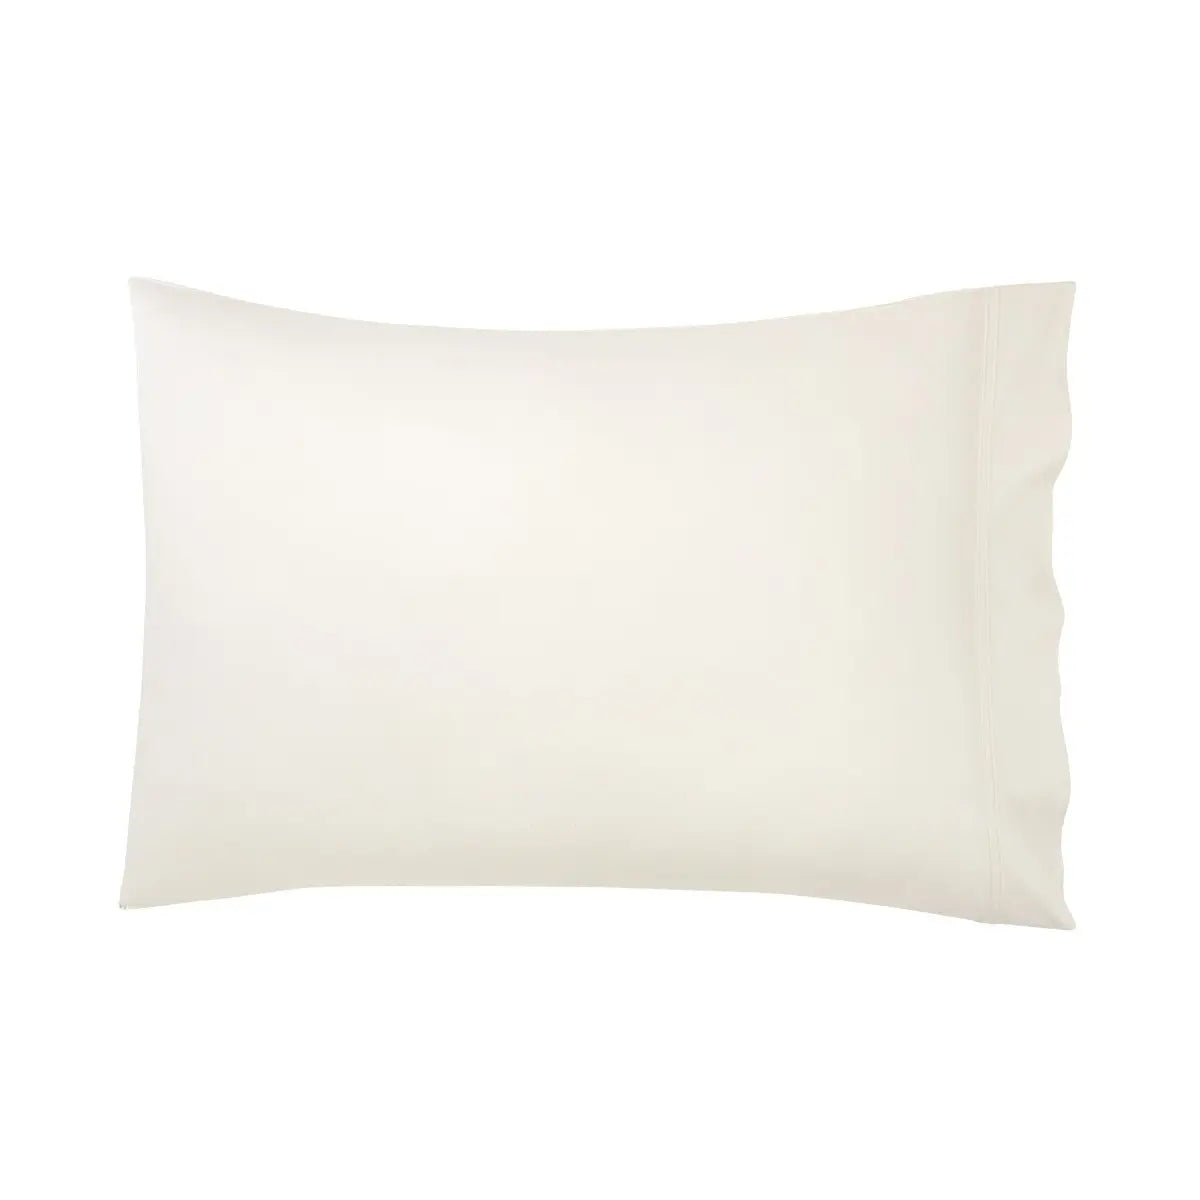 Yves Delorme Triomphe Pillowcase in Nacre